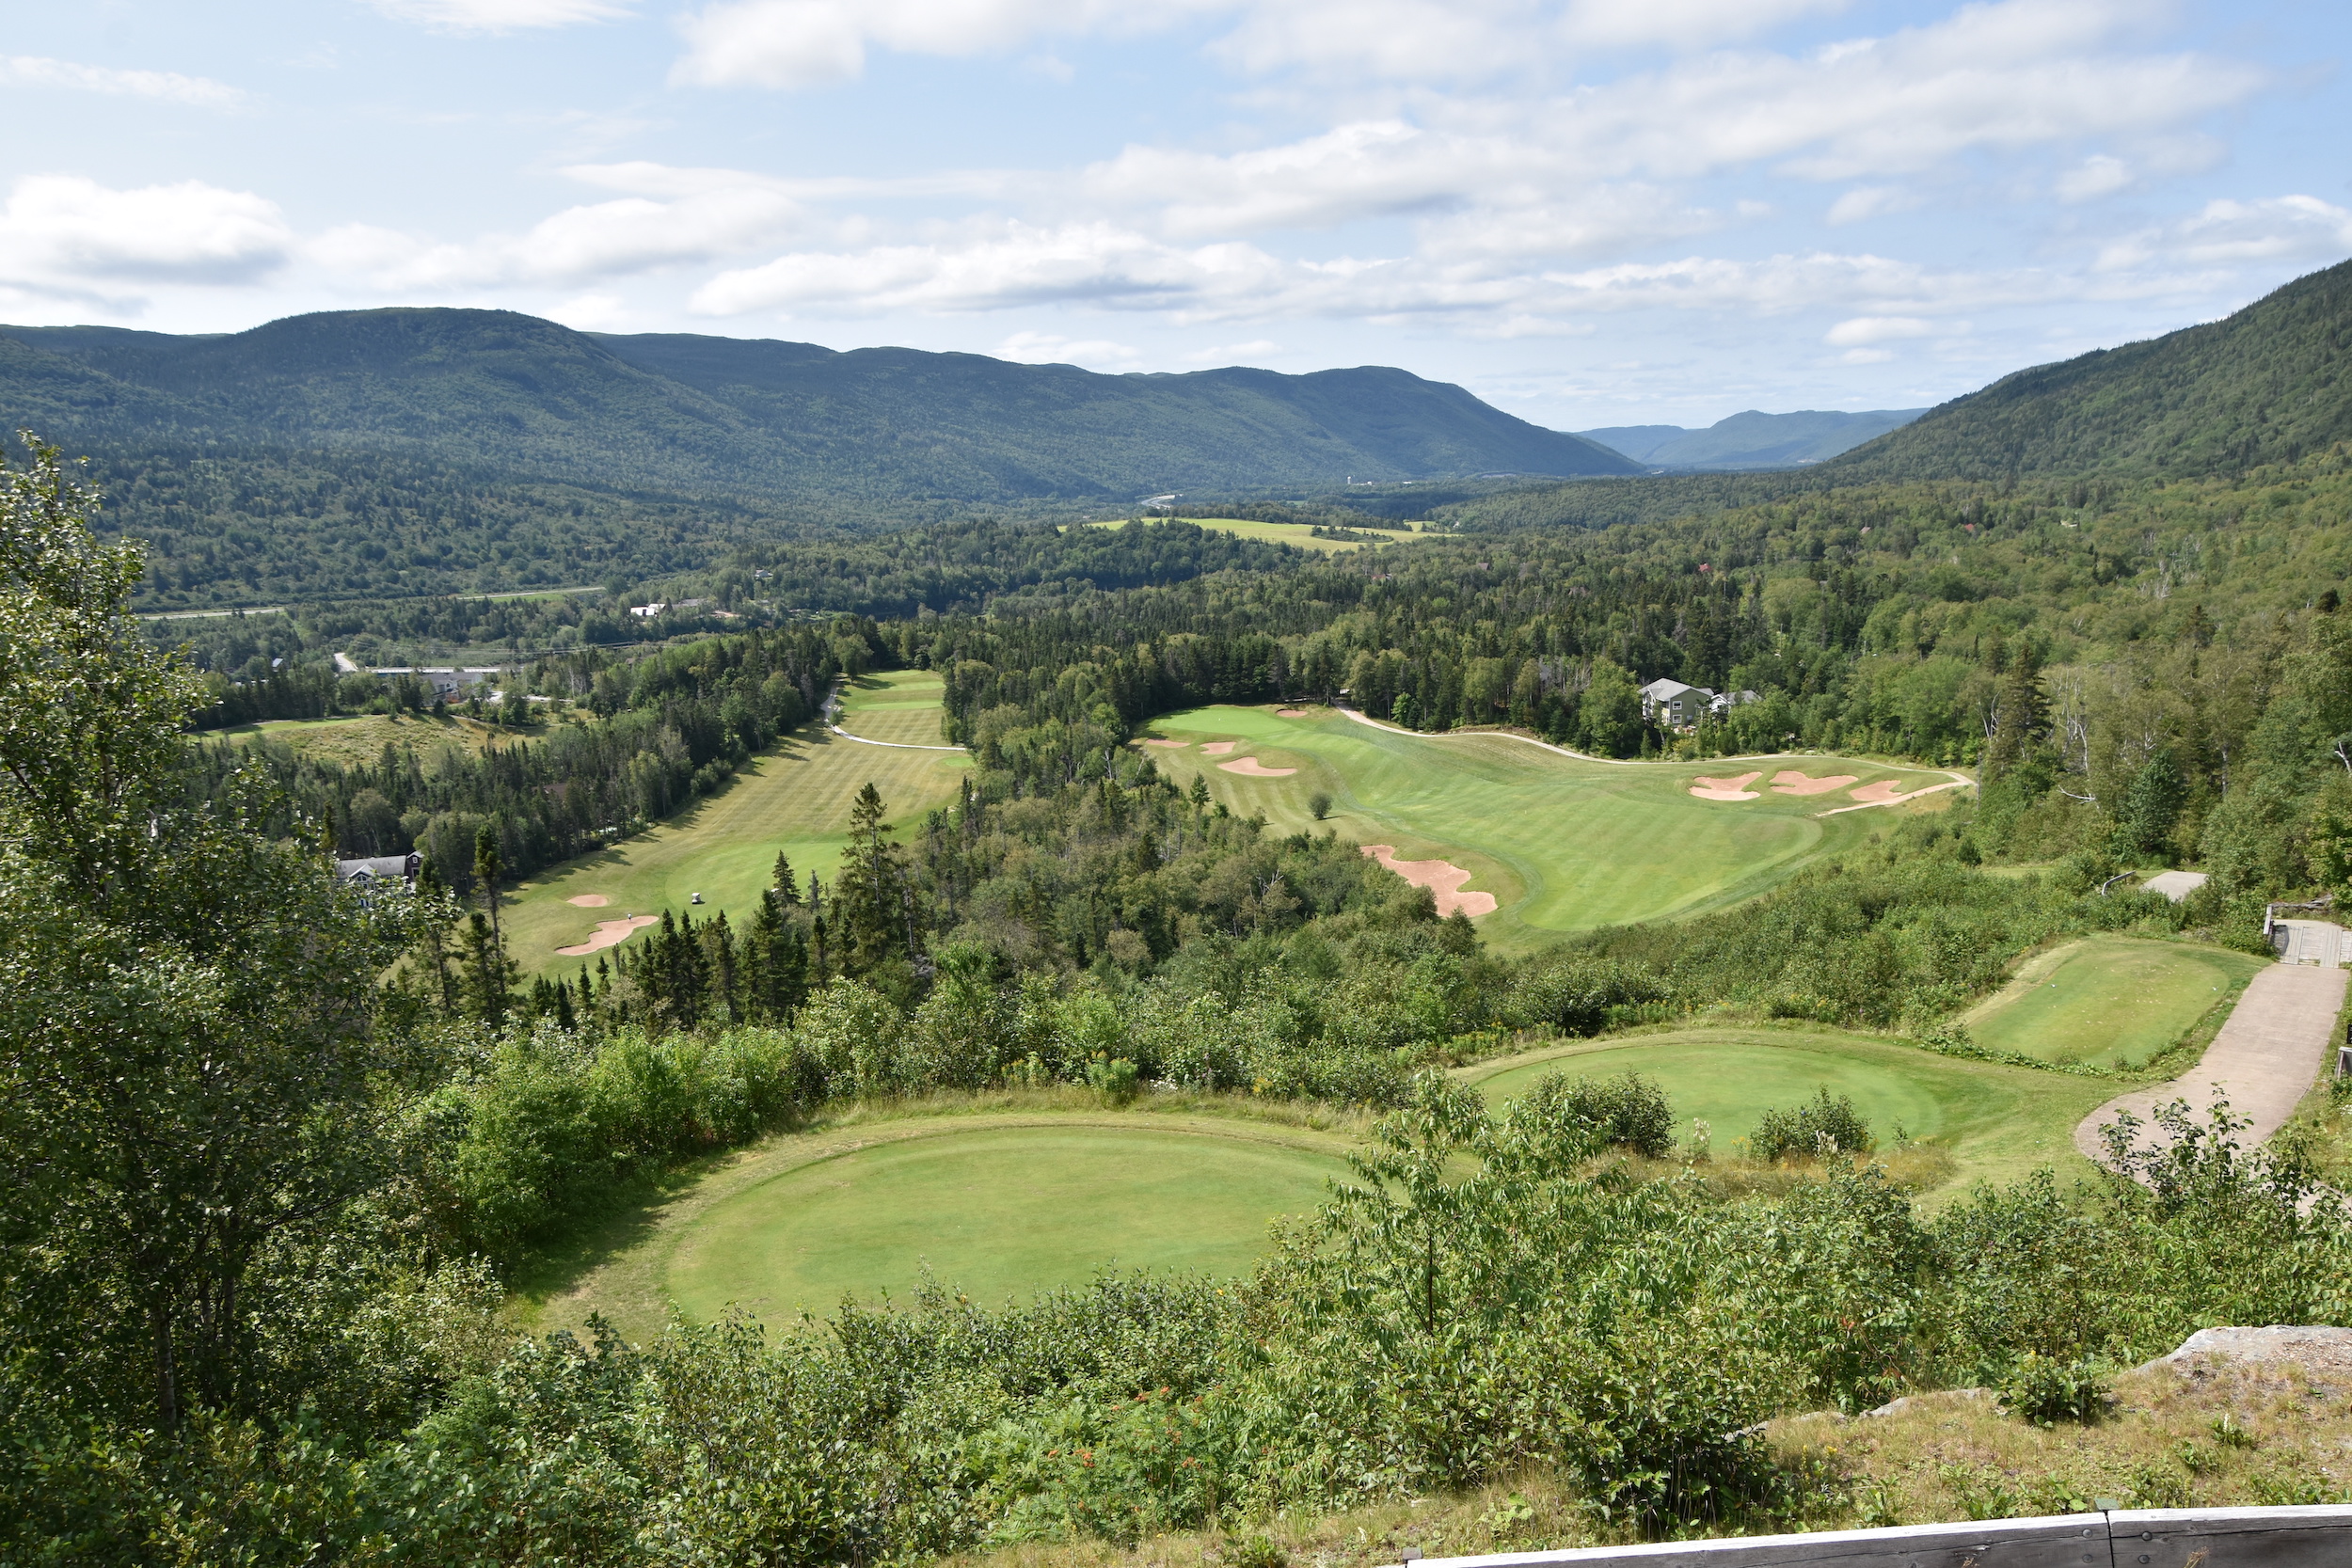 View from Eagle's Perch, Humber Valley Resort